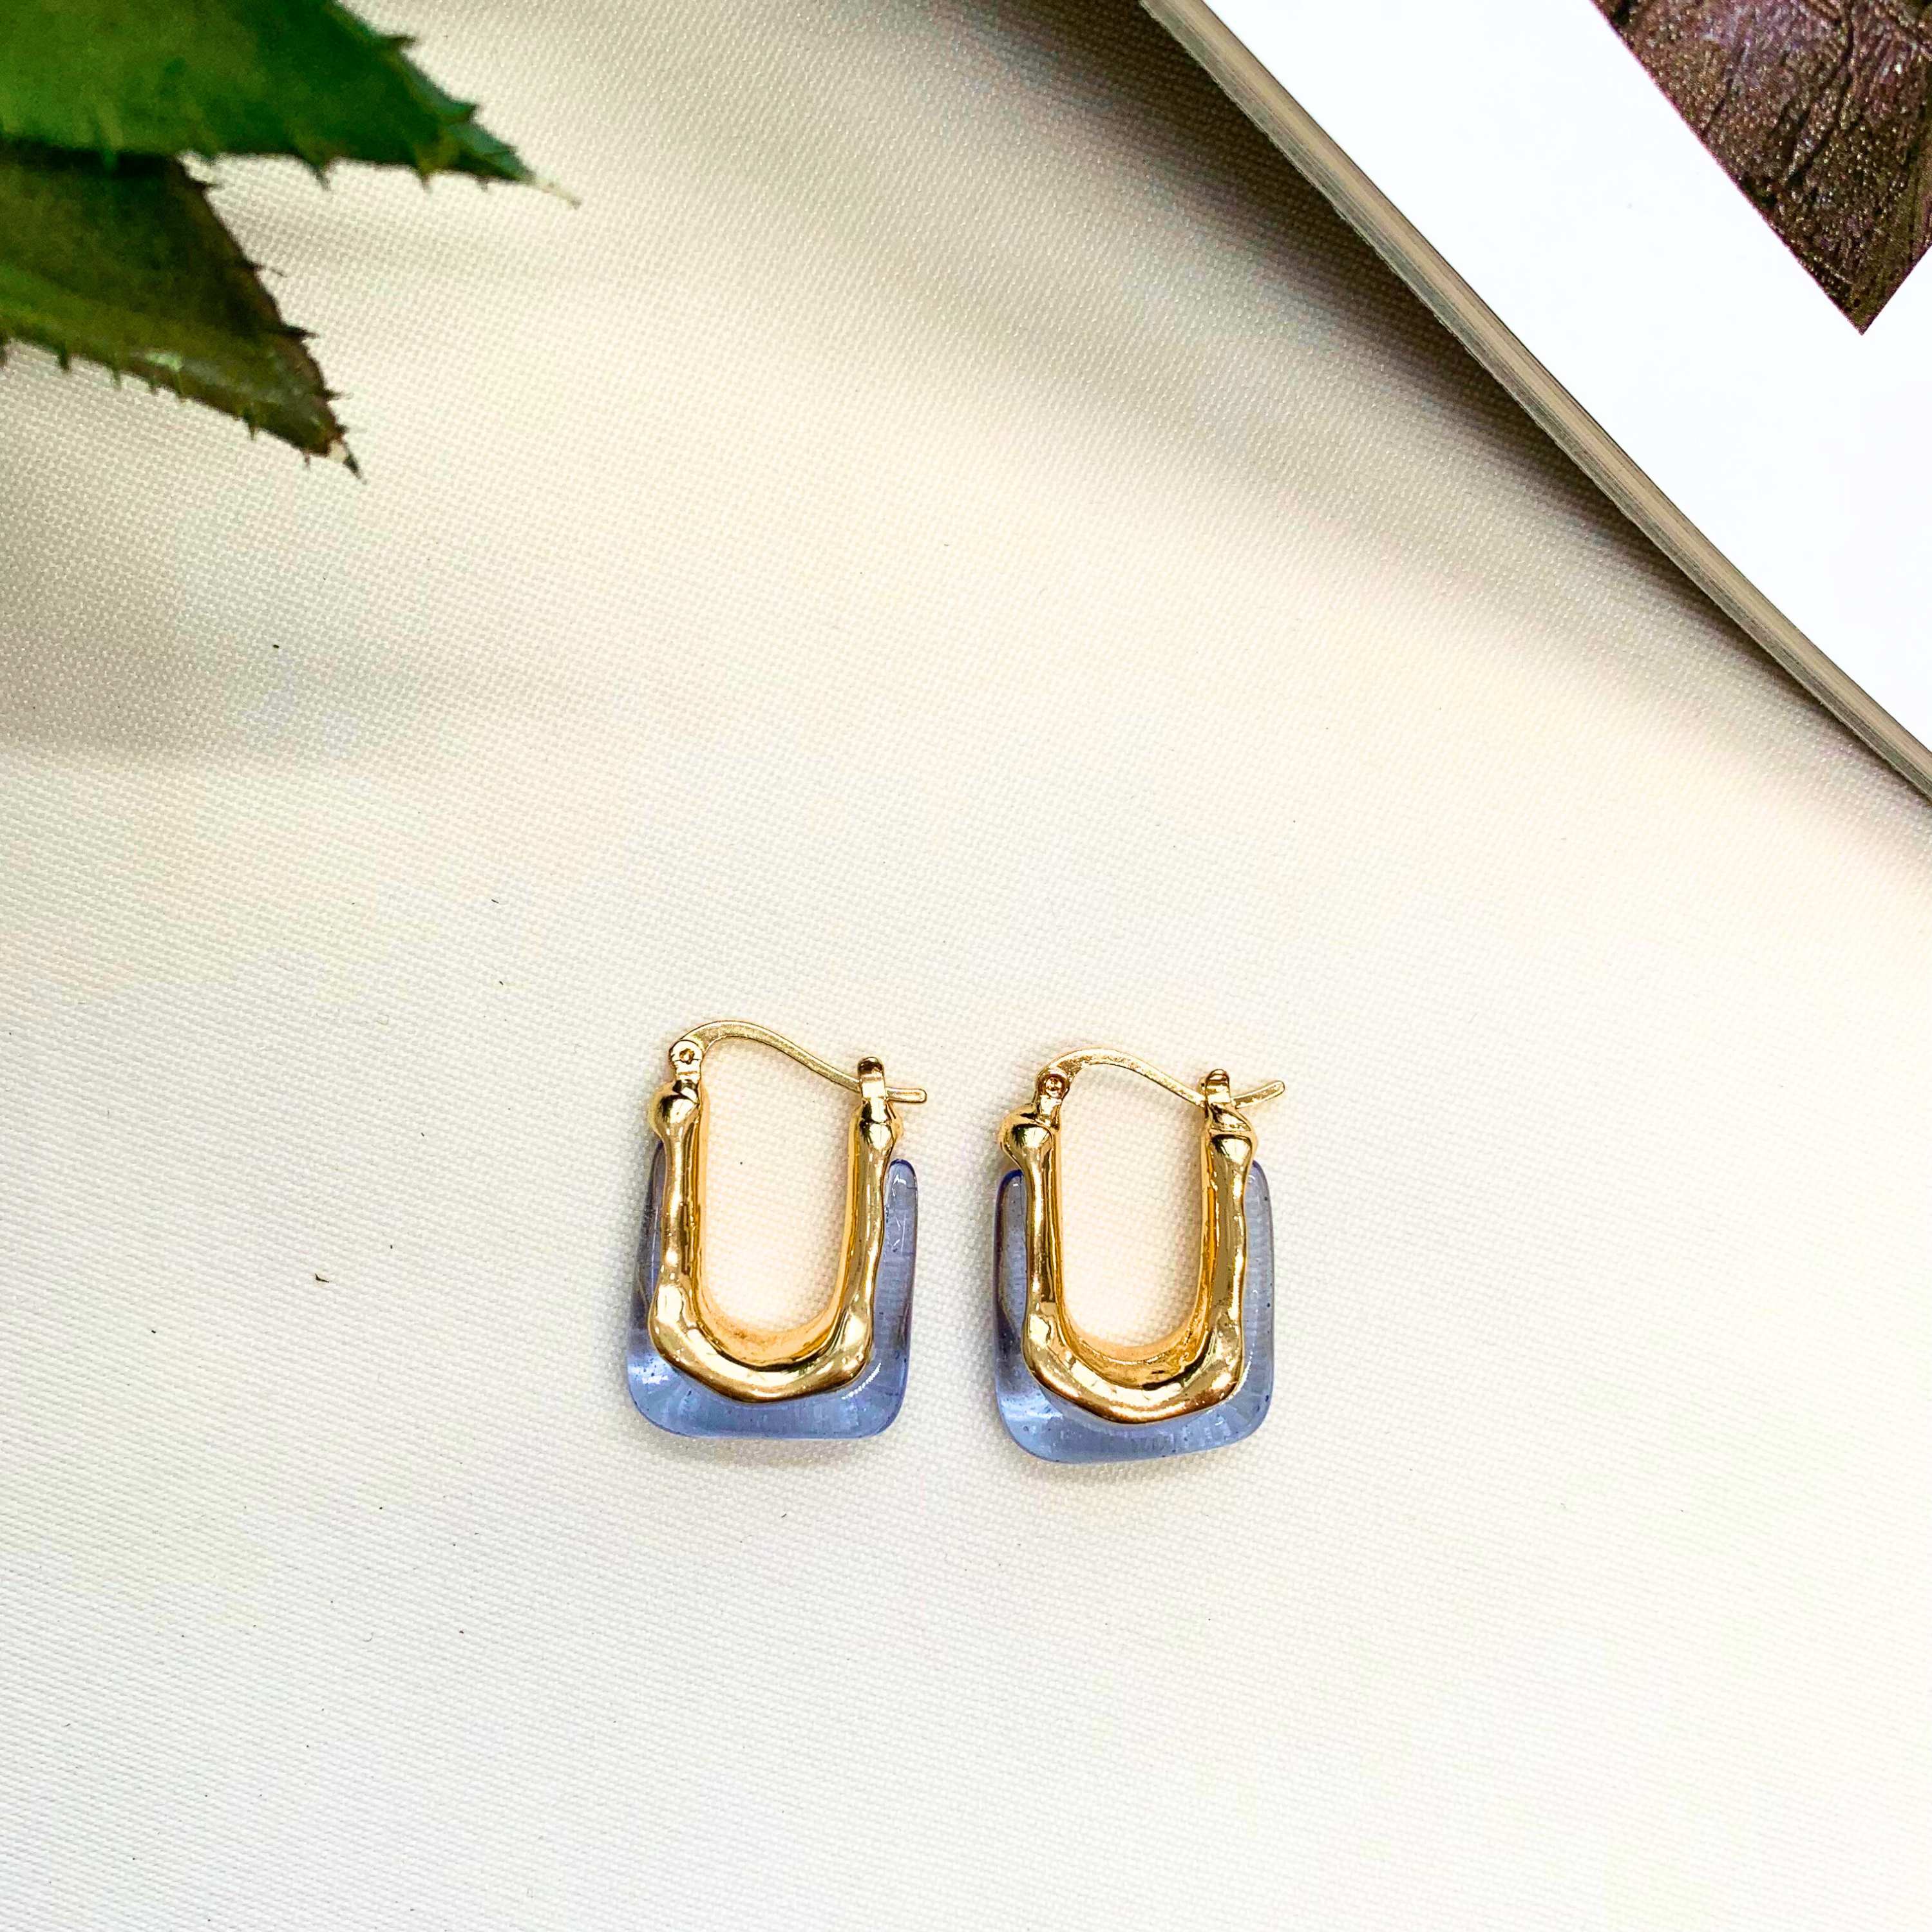 Large 14K Gold Endless Rectangle Hoops